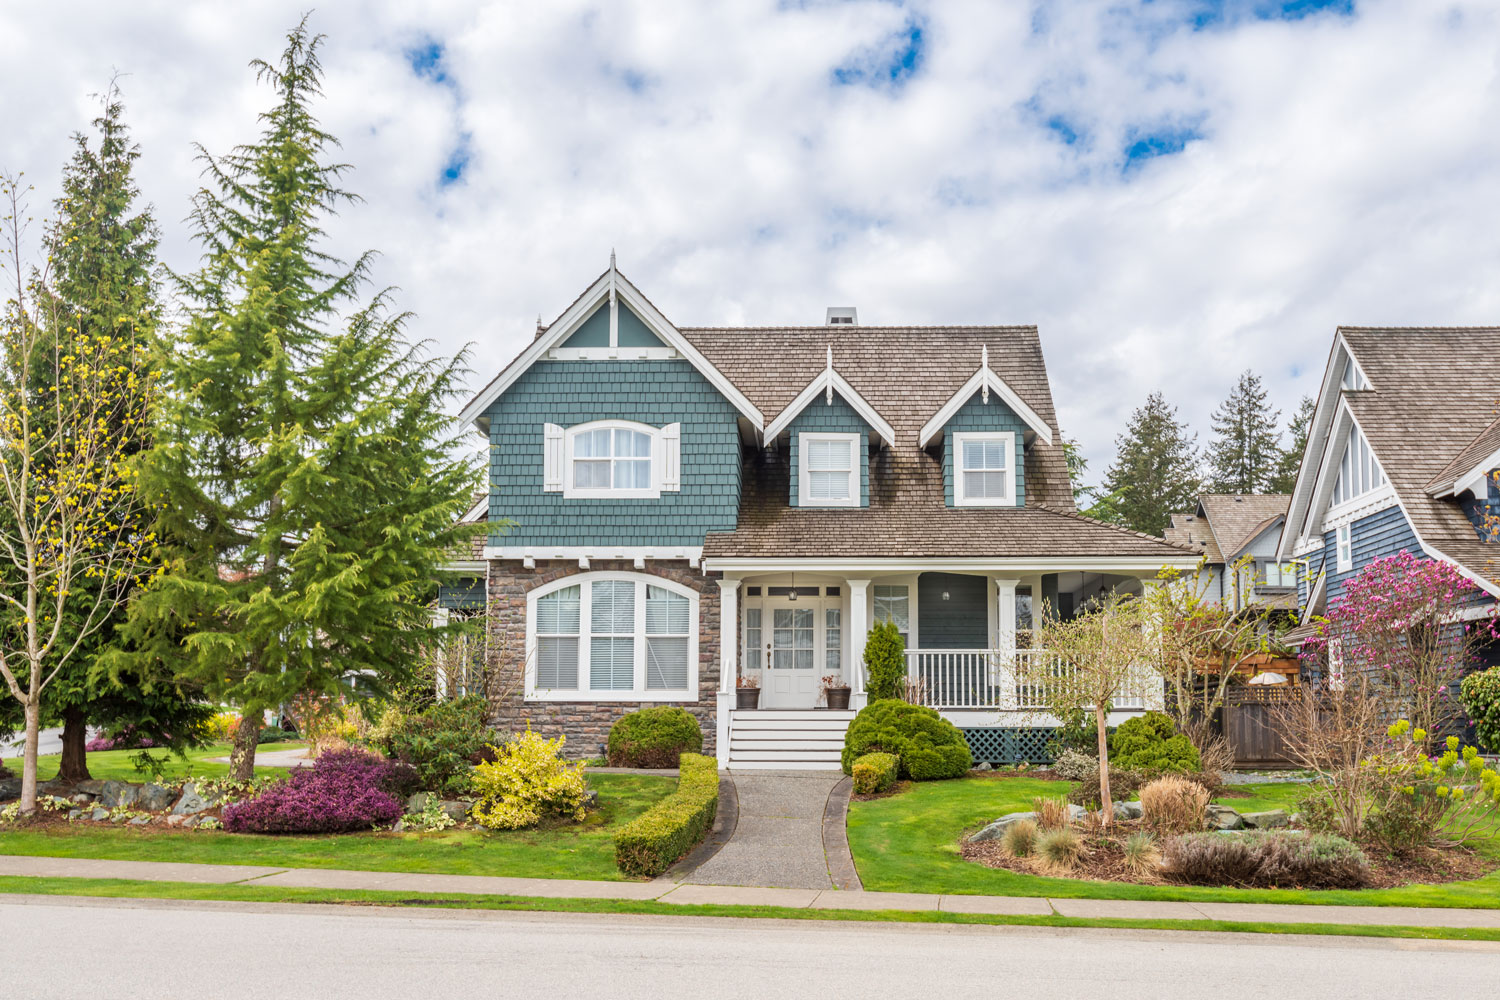 Classic two story designed house with blue shingle sidings and beautiful landscaping